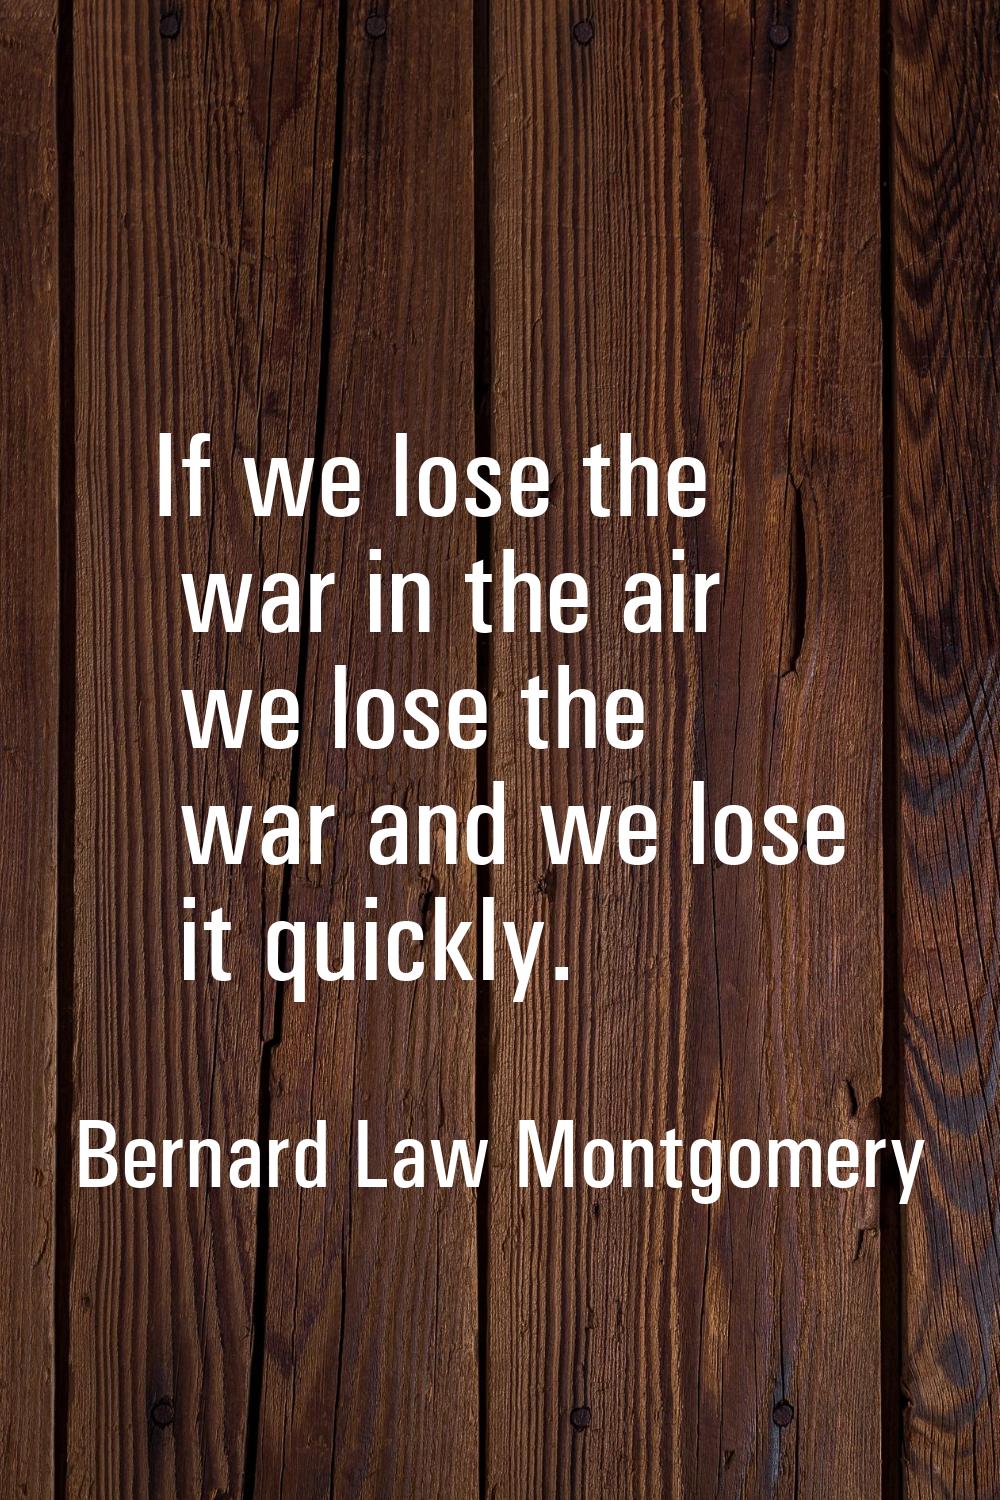 If we lose the war in the air we lose the war and we lose it quickly.